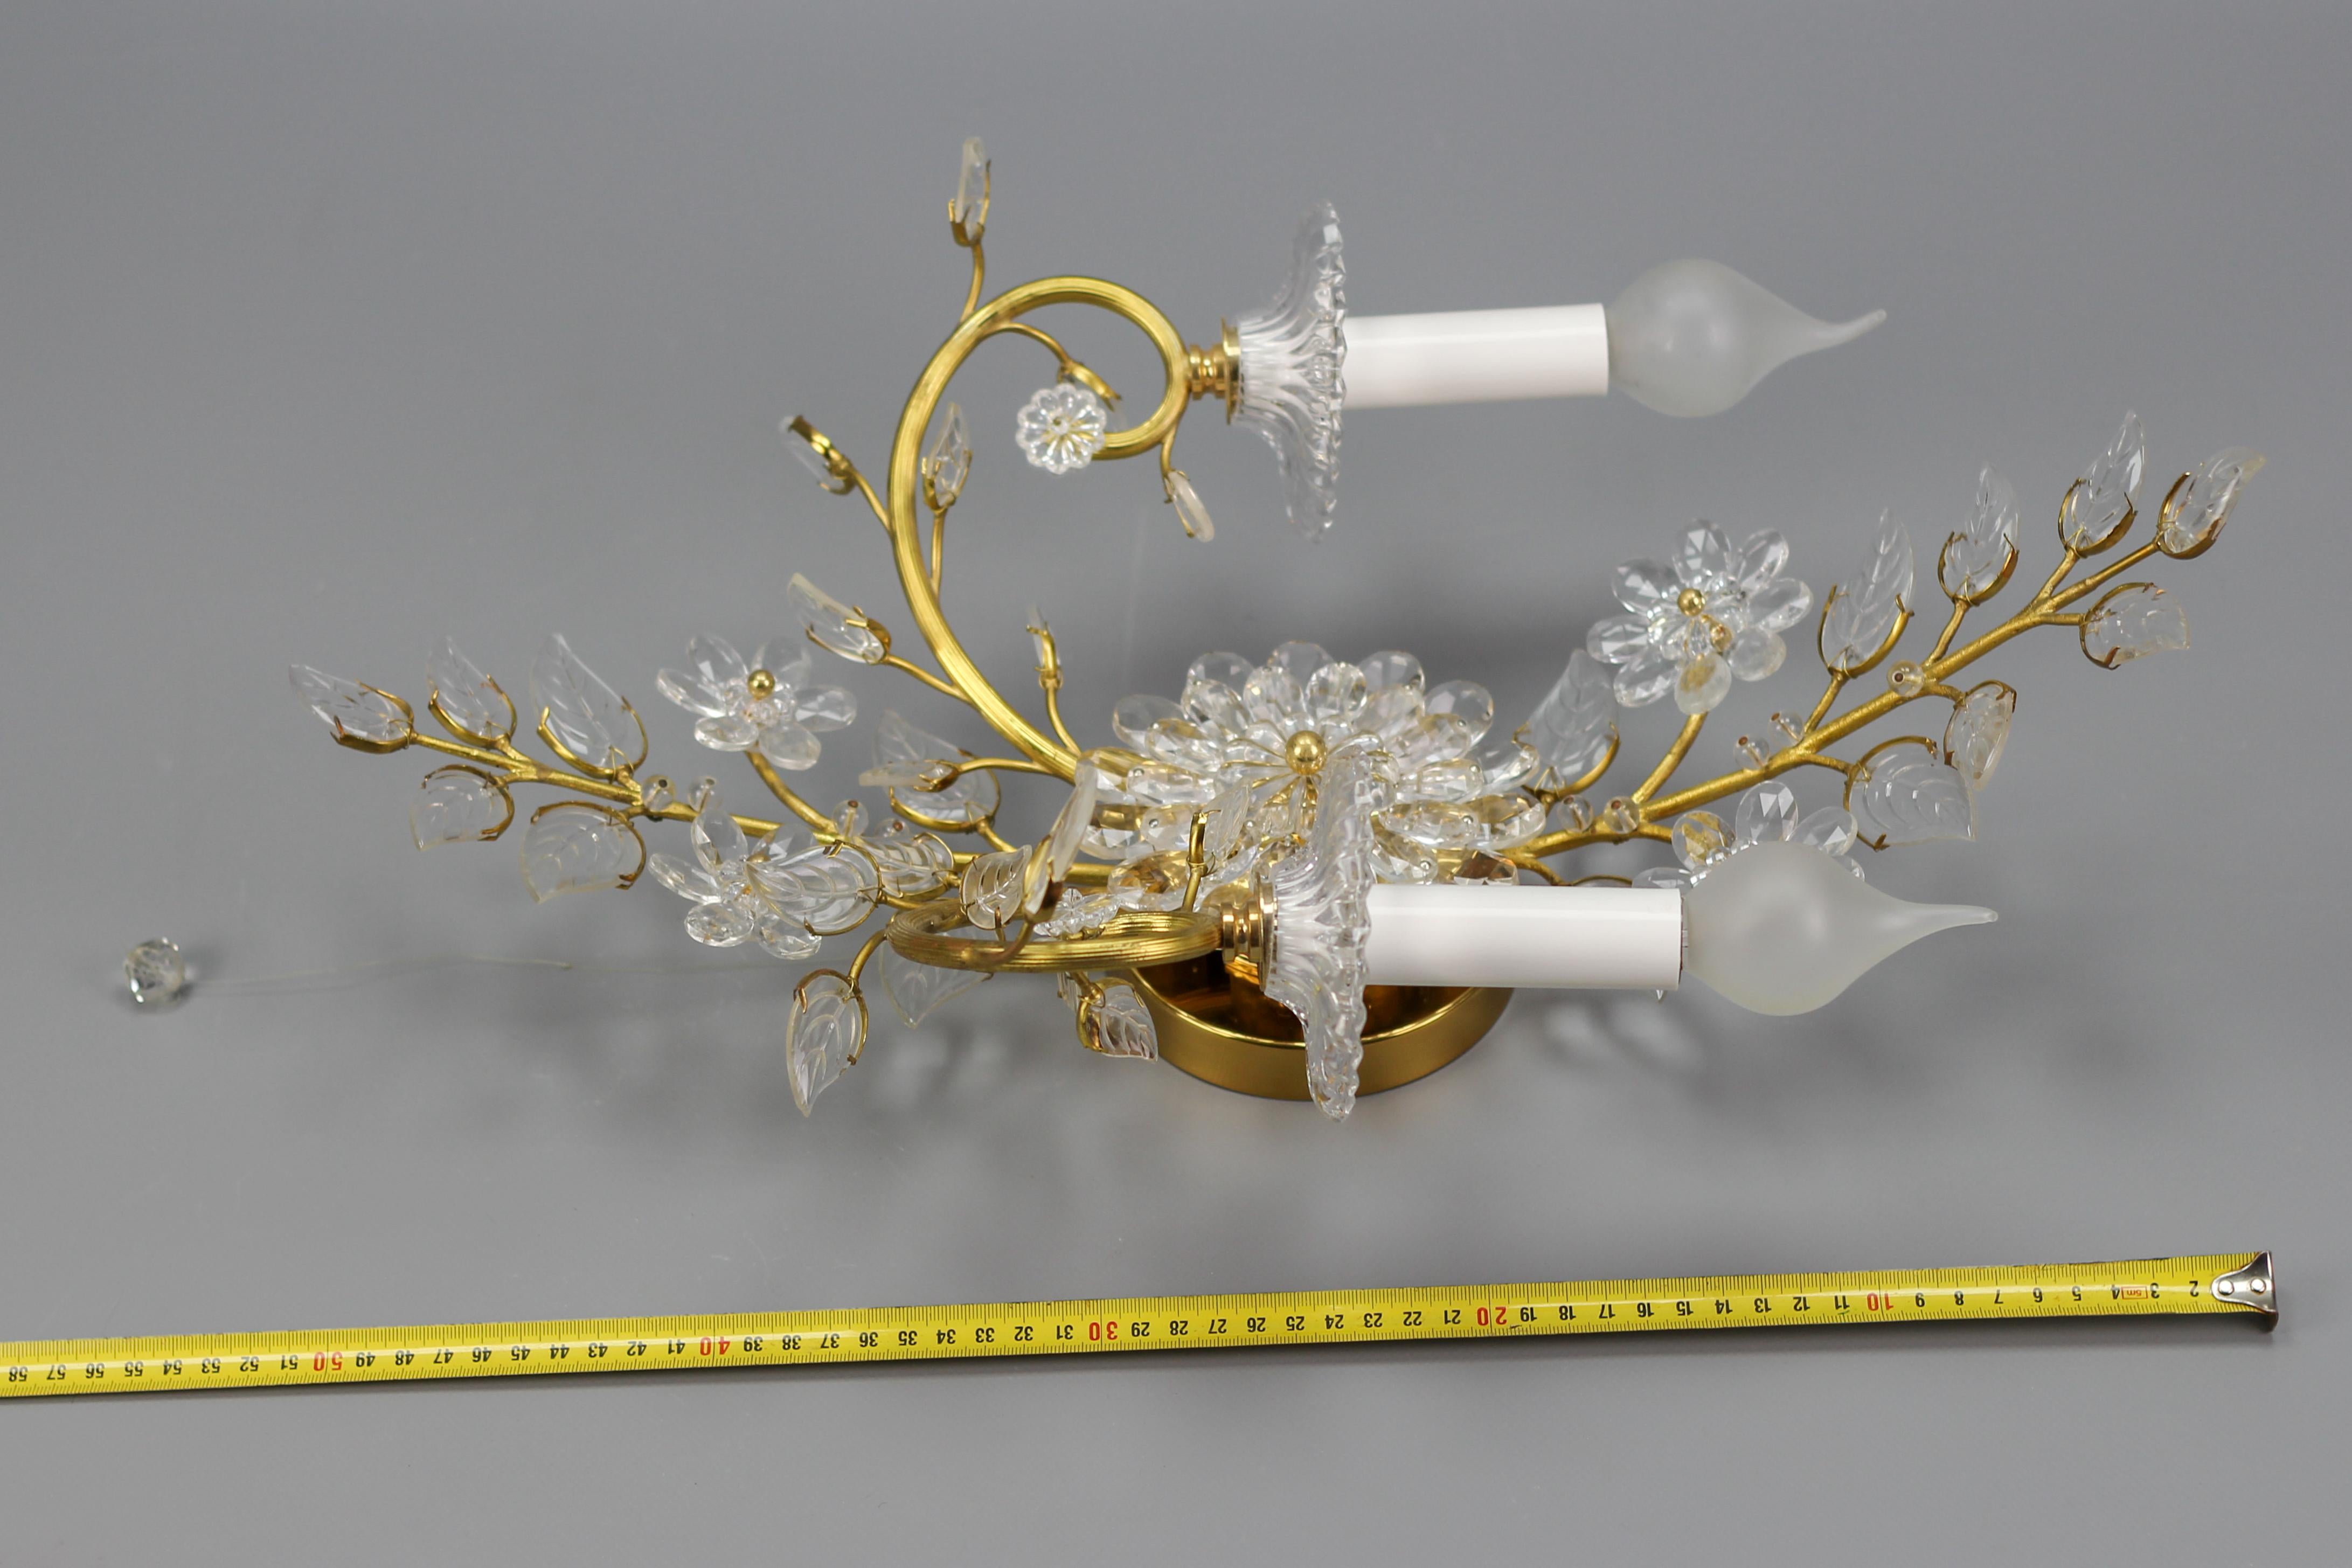 Palme & Walter Crystal and Brass Floral Wall Sconce by Palwa, Germany, 1960s For Sale 6